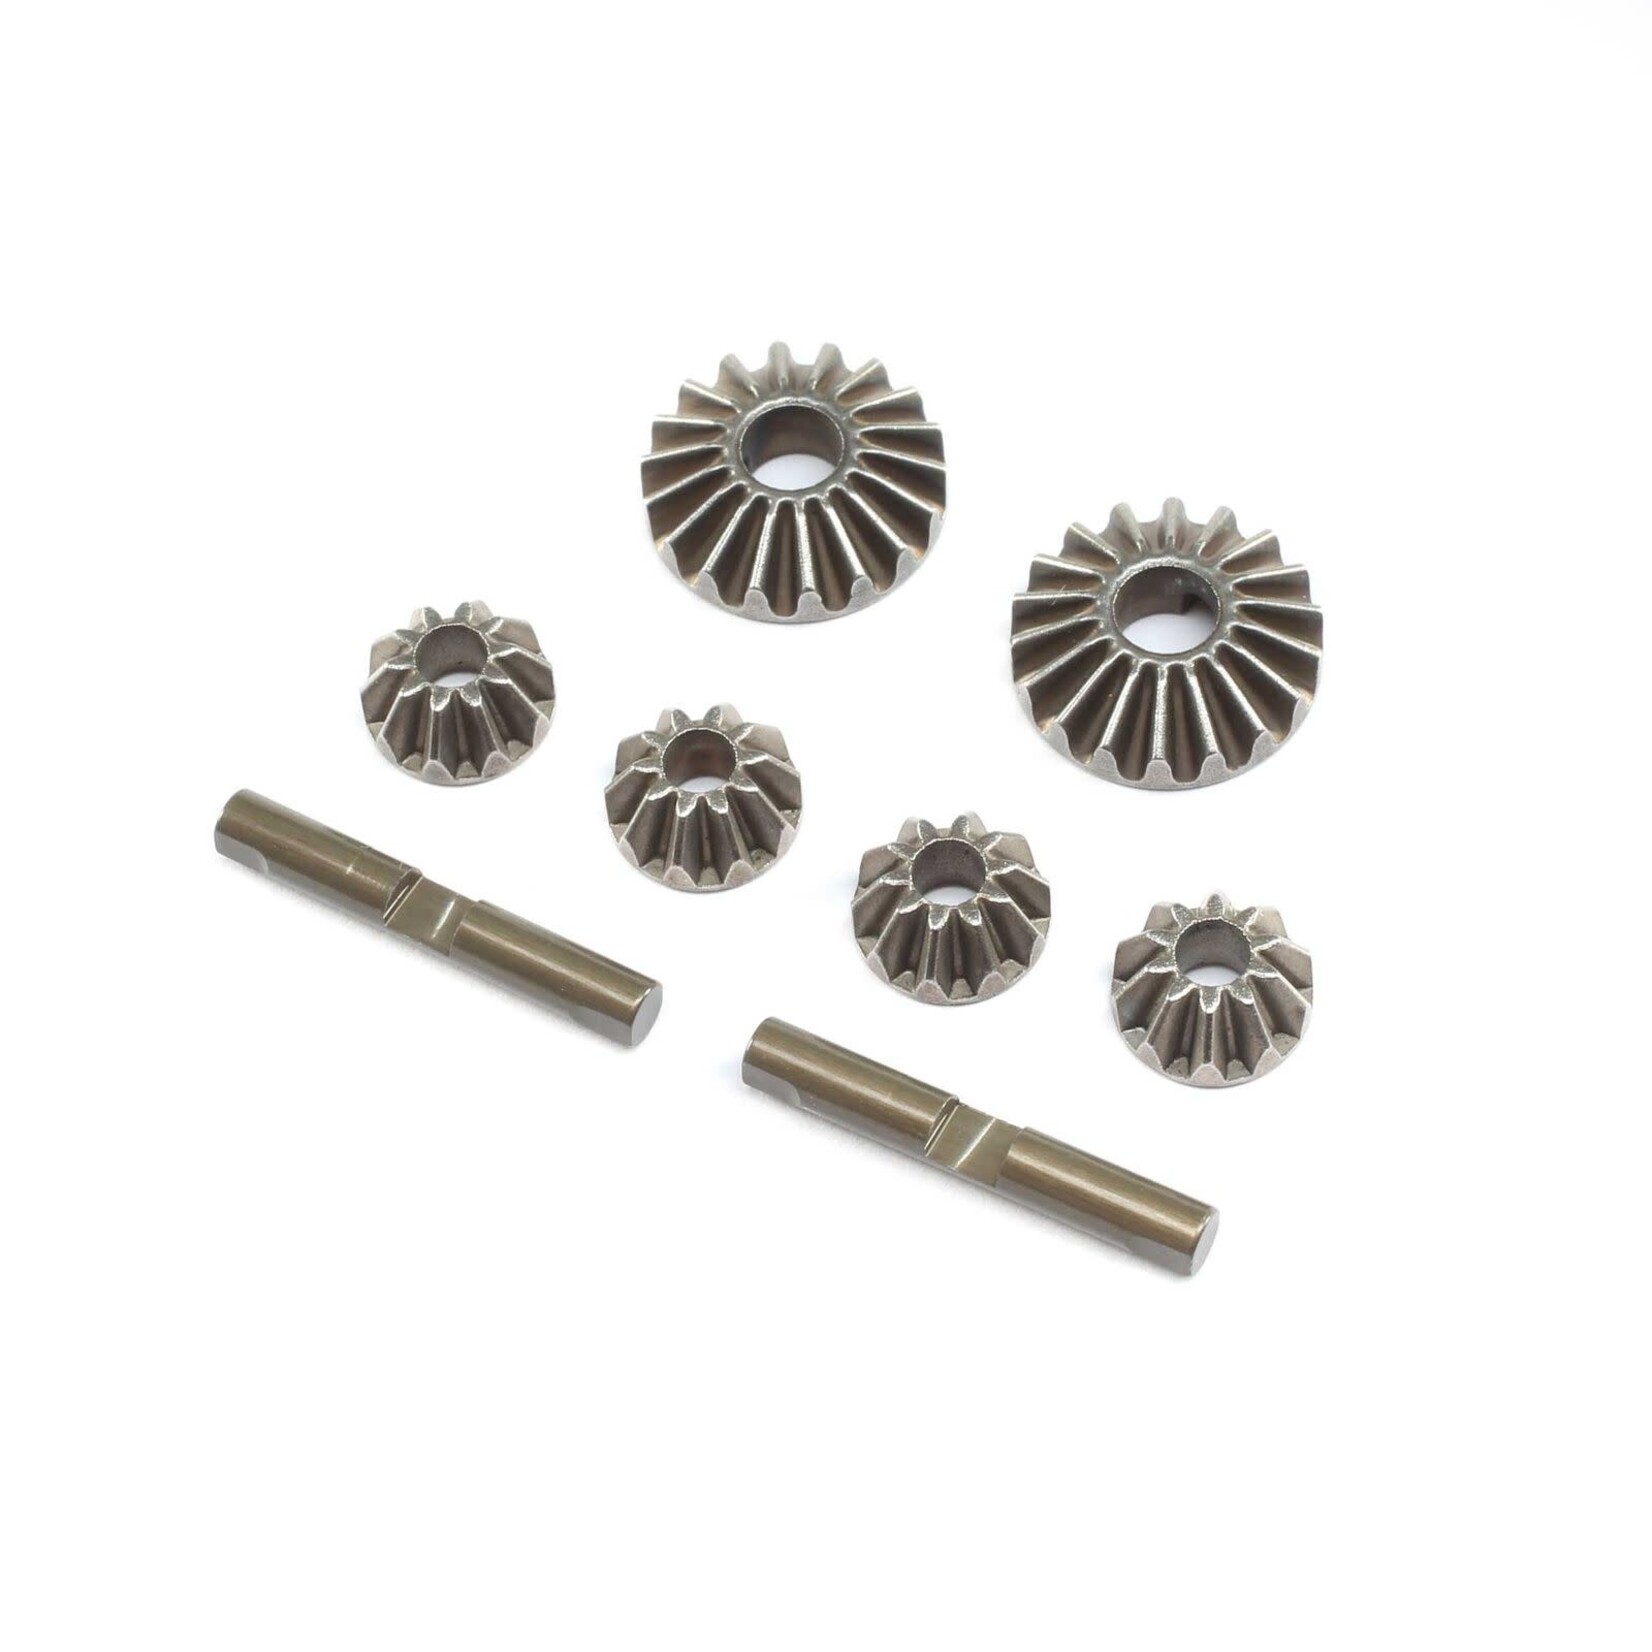 TLR TLR232129 TLR 22X-4 Differential Gear & Cross Pin Set